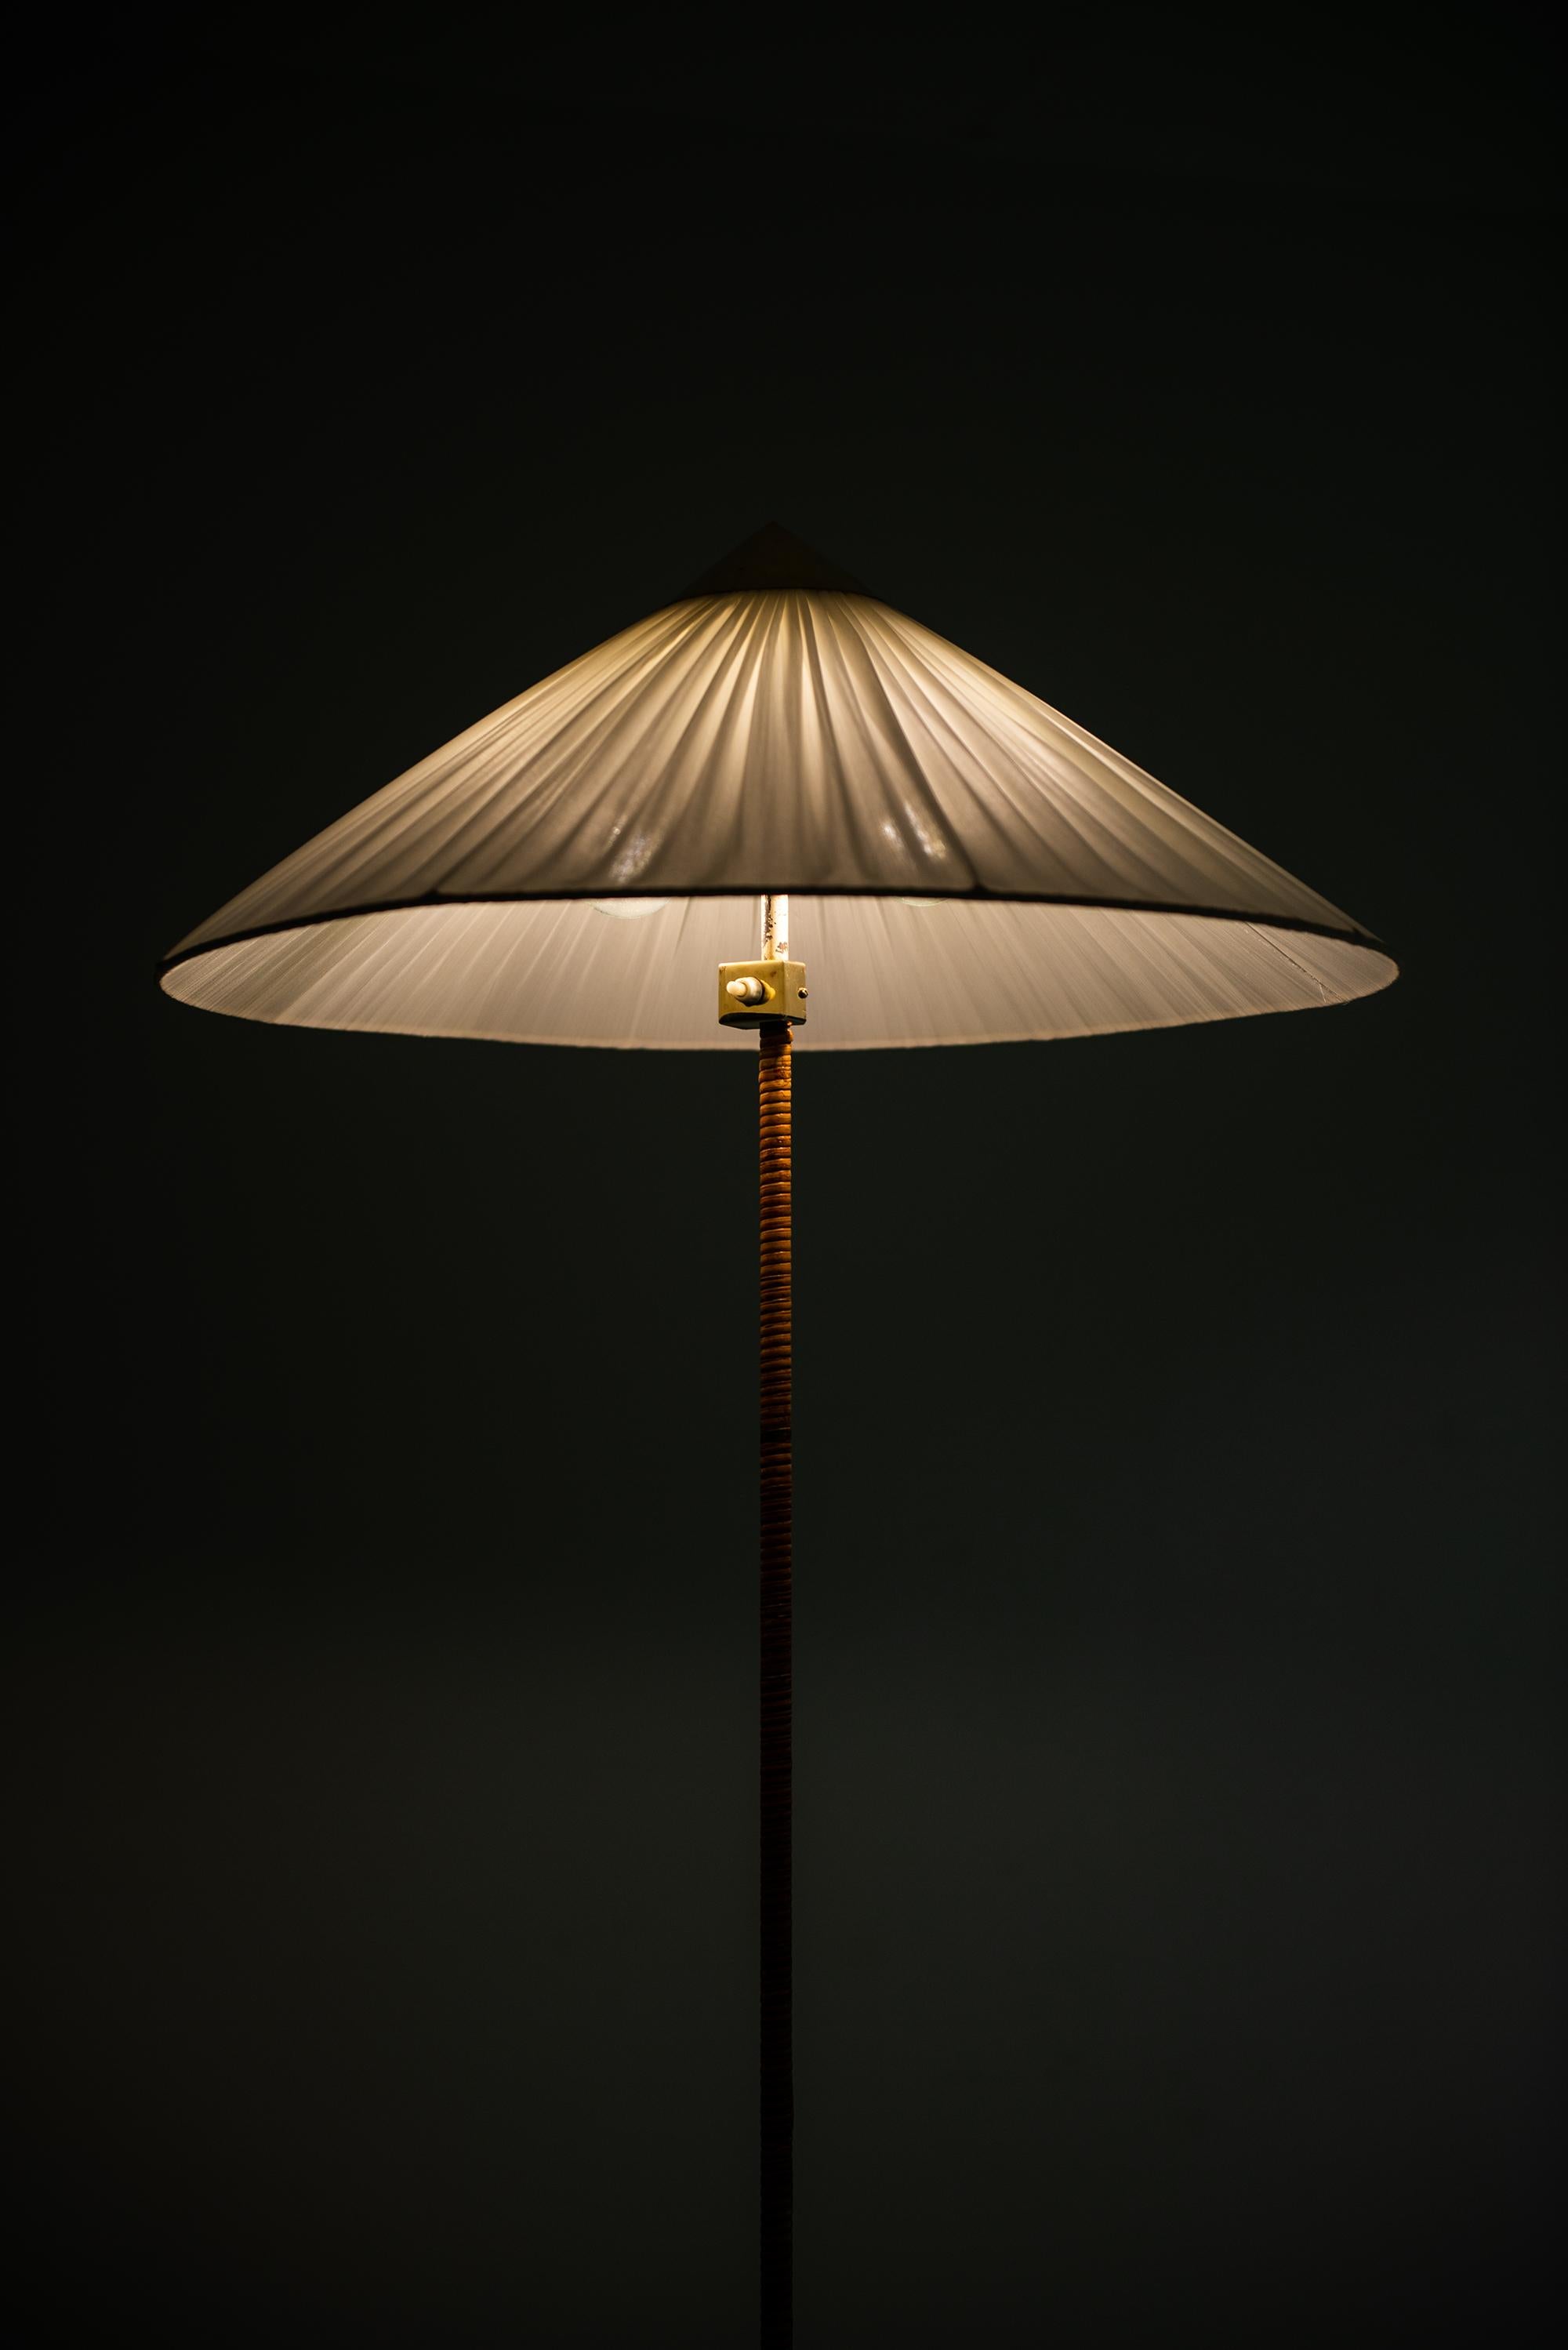 Brass Paavo Tynell Floor Lamps Model 9602 / Chinese Hat by Taito Oy in Finland